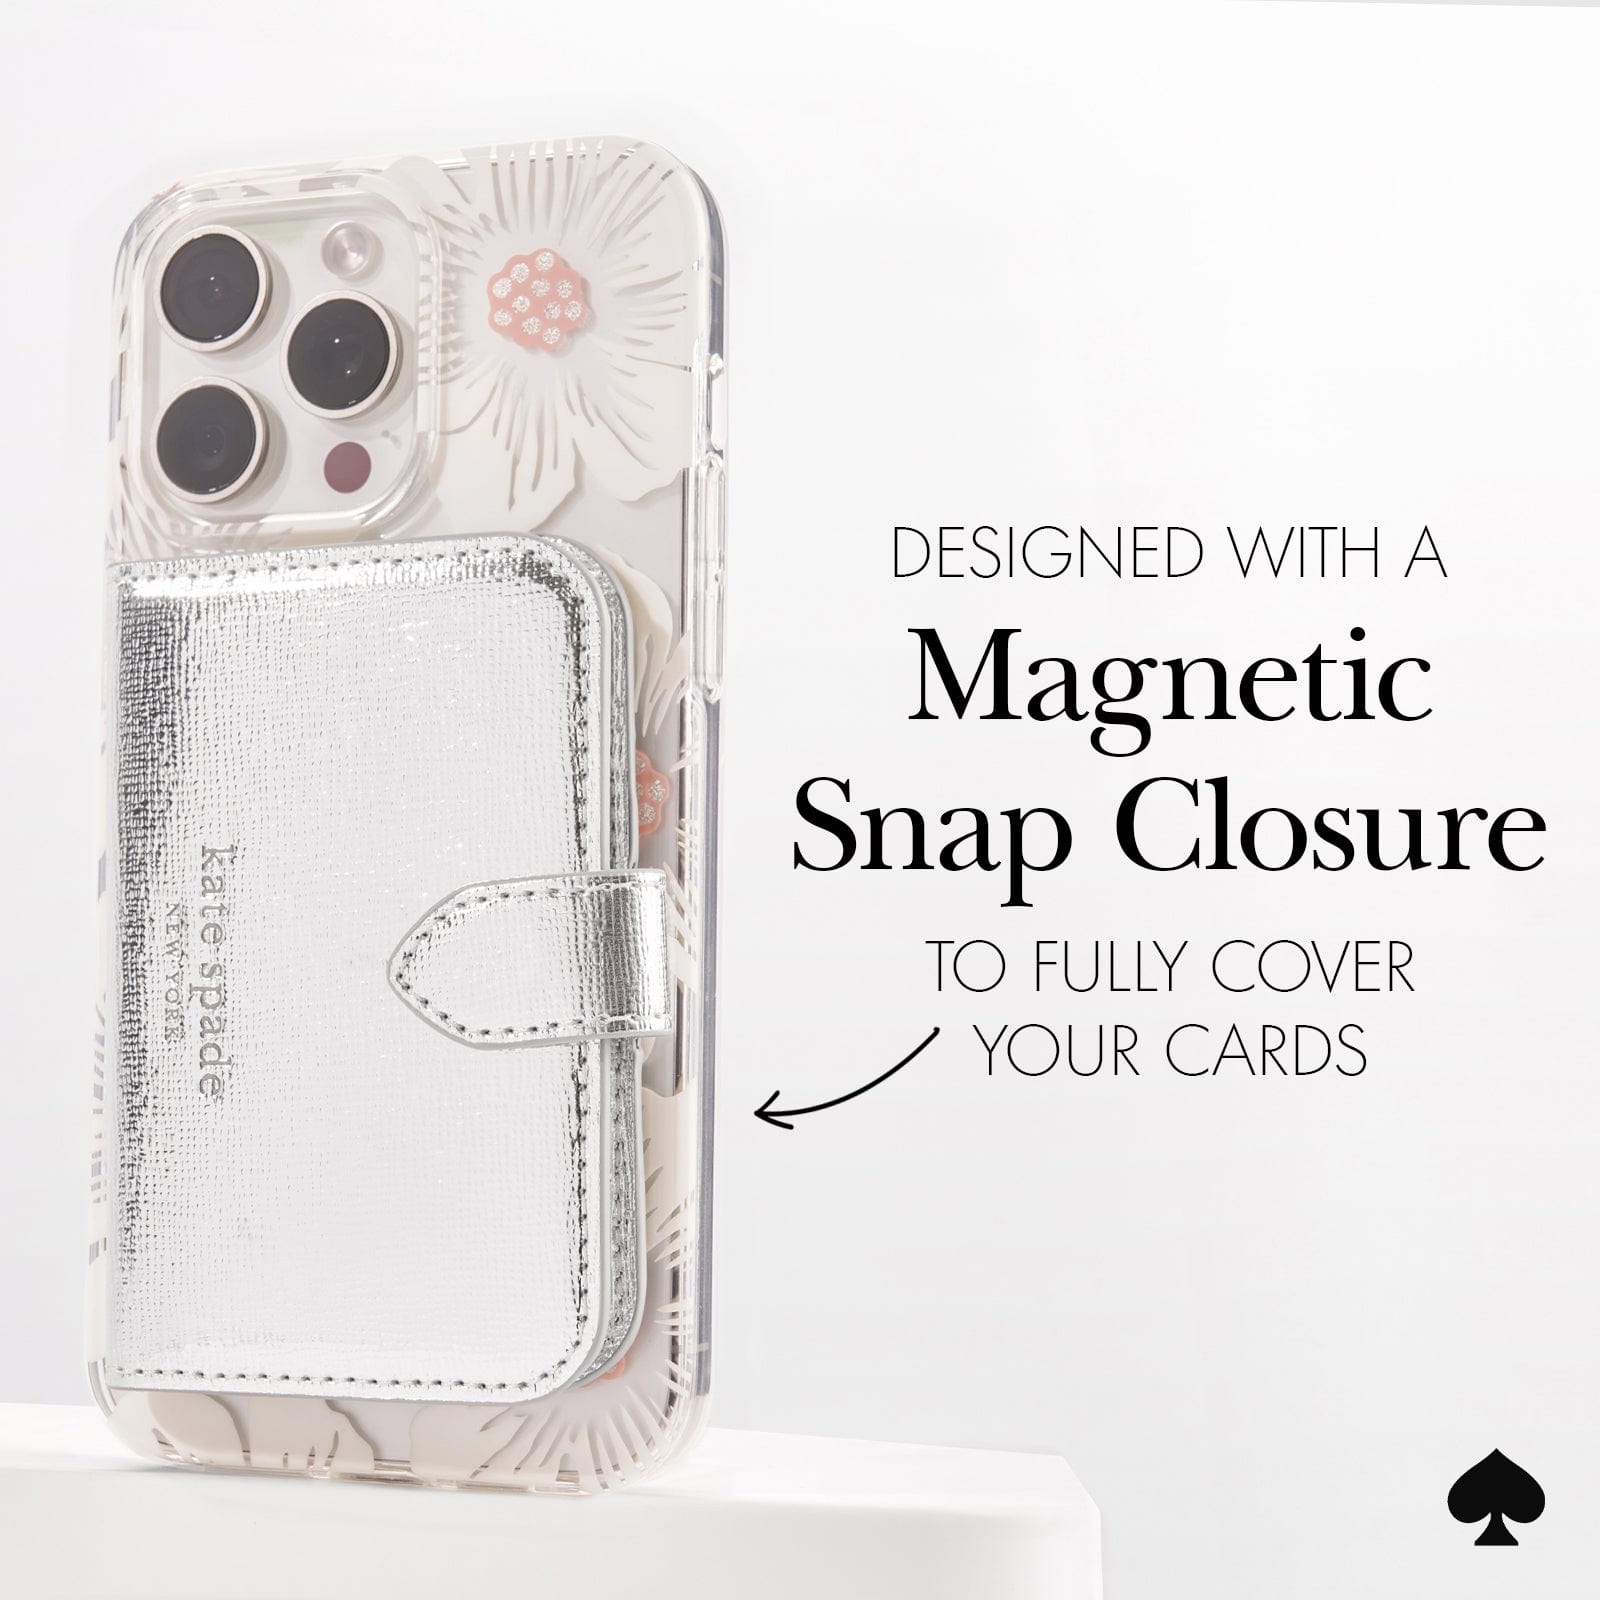 DESIGNED WITH MAGNETIC SNAP CLOSURE. TO FULLY COVER YOUR CARDS